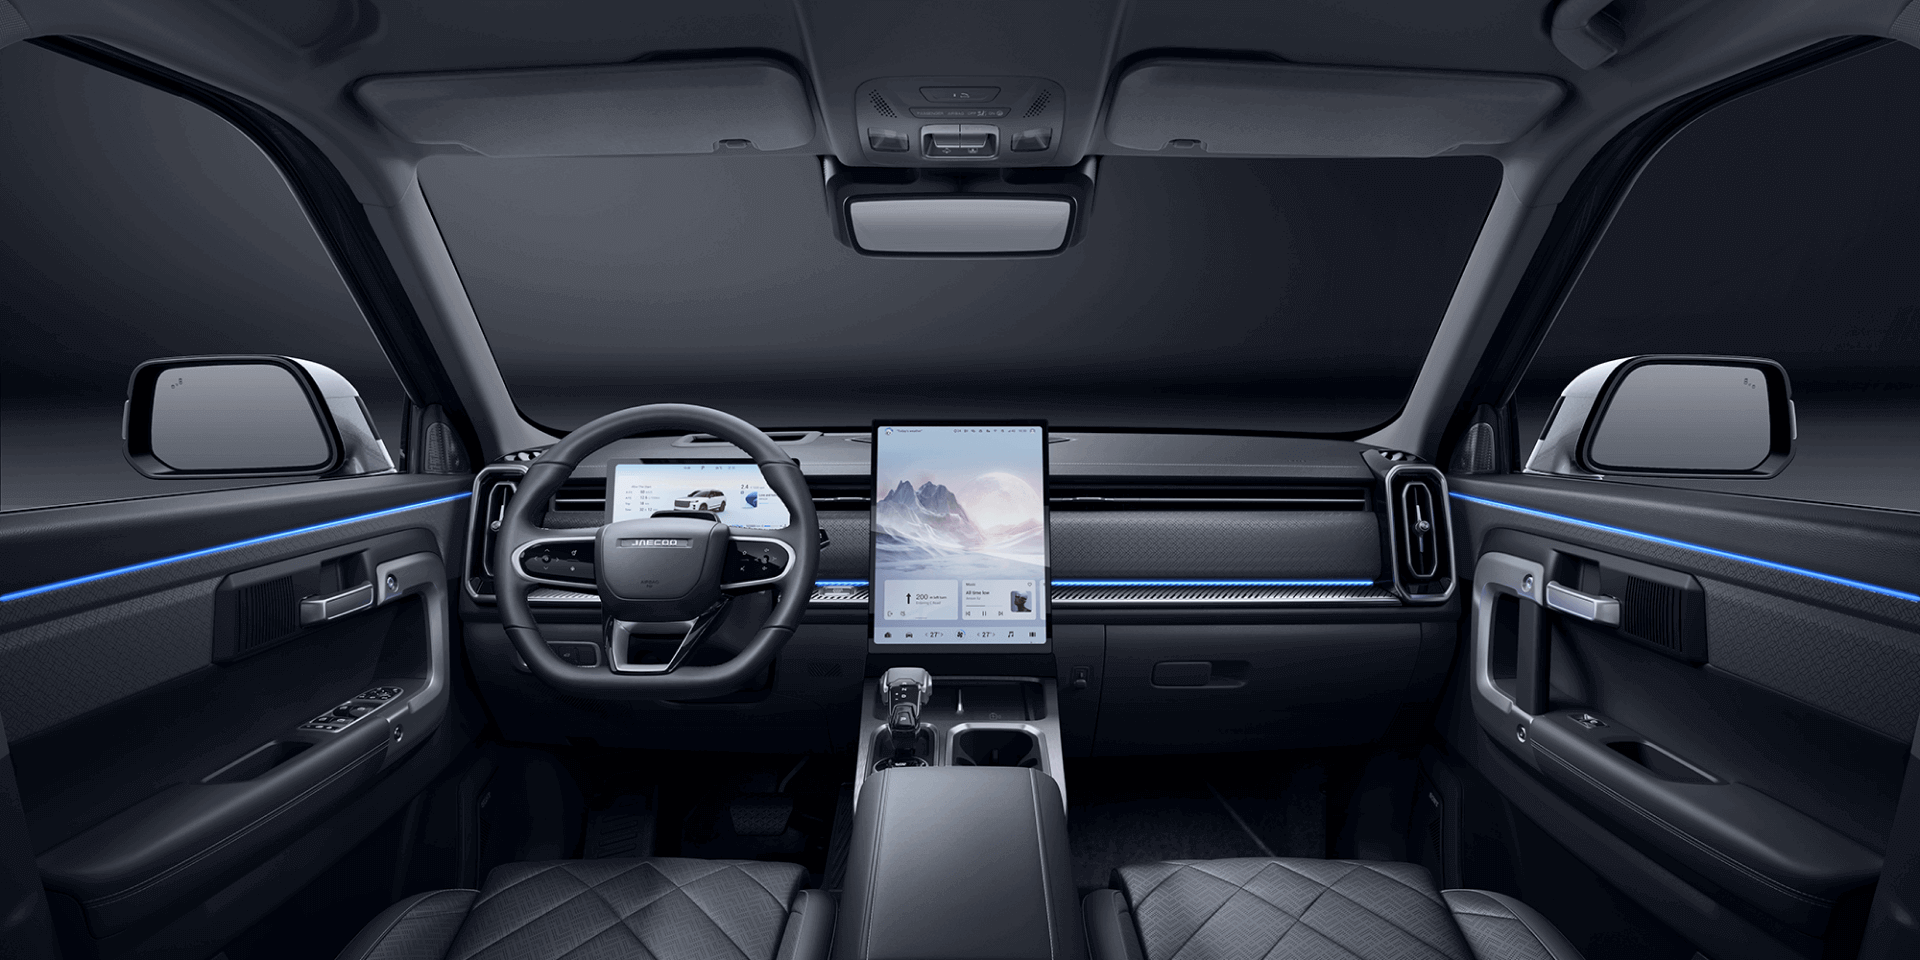 Interior view of the new premium off-road SUV, showcasing a modern dashboard with a digital screen, steering wheel, center console with another touchscreen display, quilted seats, and ambient blue lighting accents designed for JAECOO premium off-road performance.